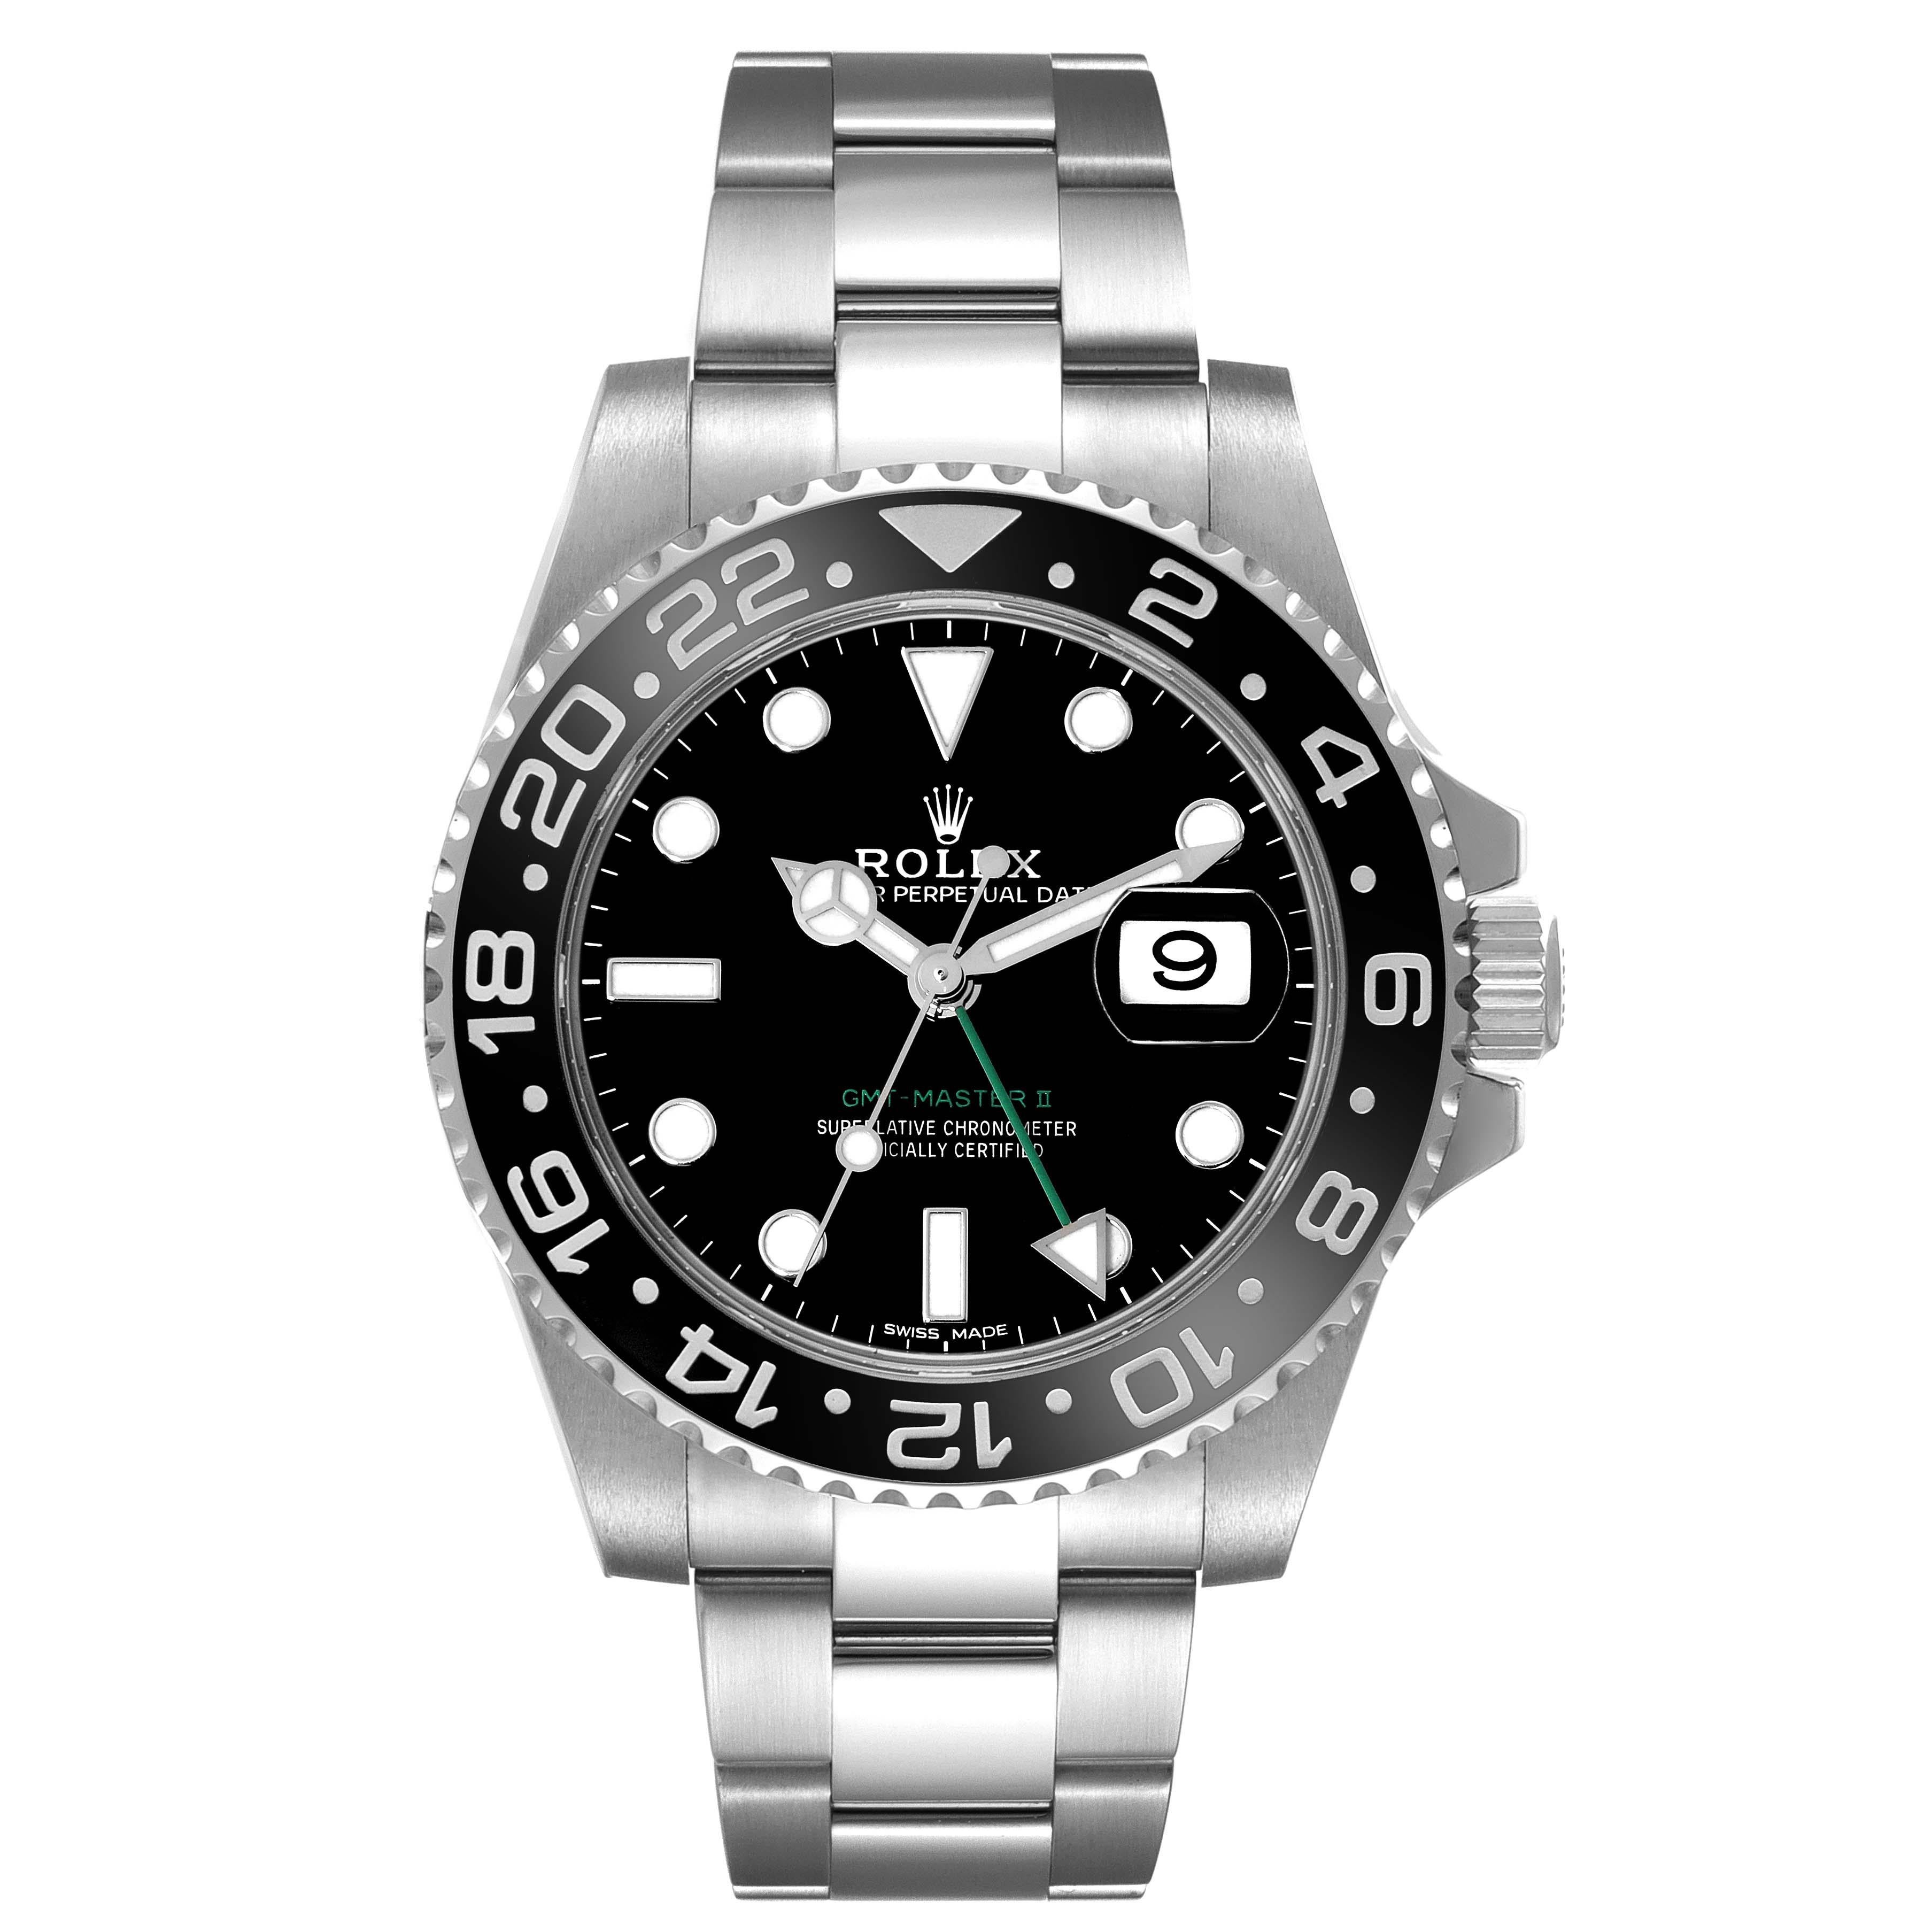 Rolex GMT Master II Black Dial Green Hand Steel Mens Watch 116710 Box Card. Officially certified chronometer automatic self-winding movement. Stainless steel case 40.0 mm in diameter. Rolex logo on the crown. Stainless steel bidirectional rotating